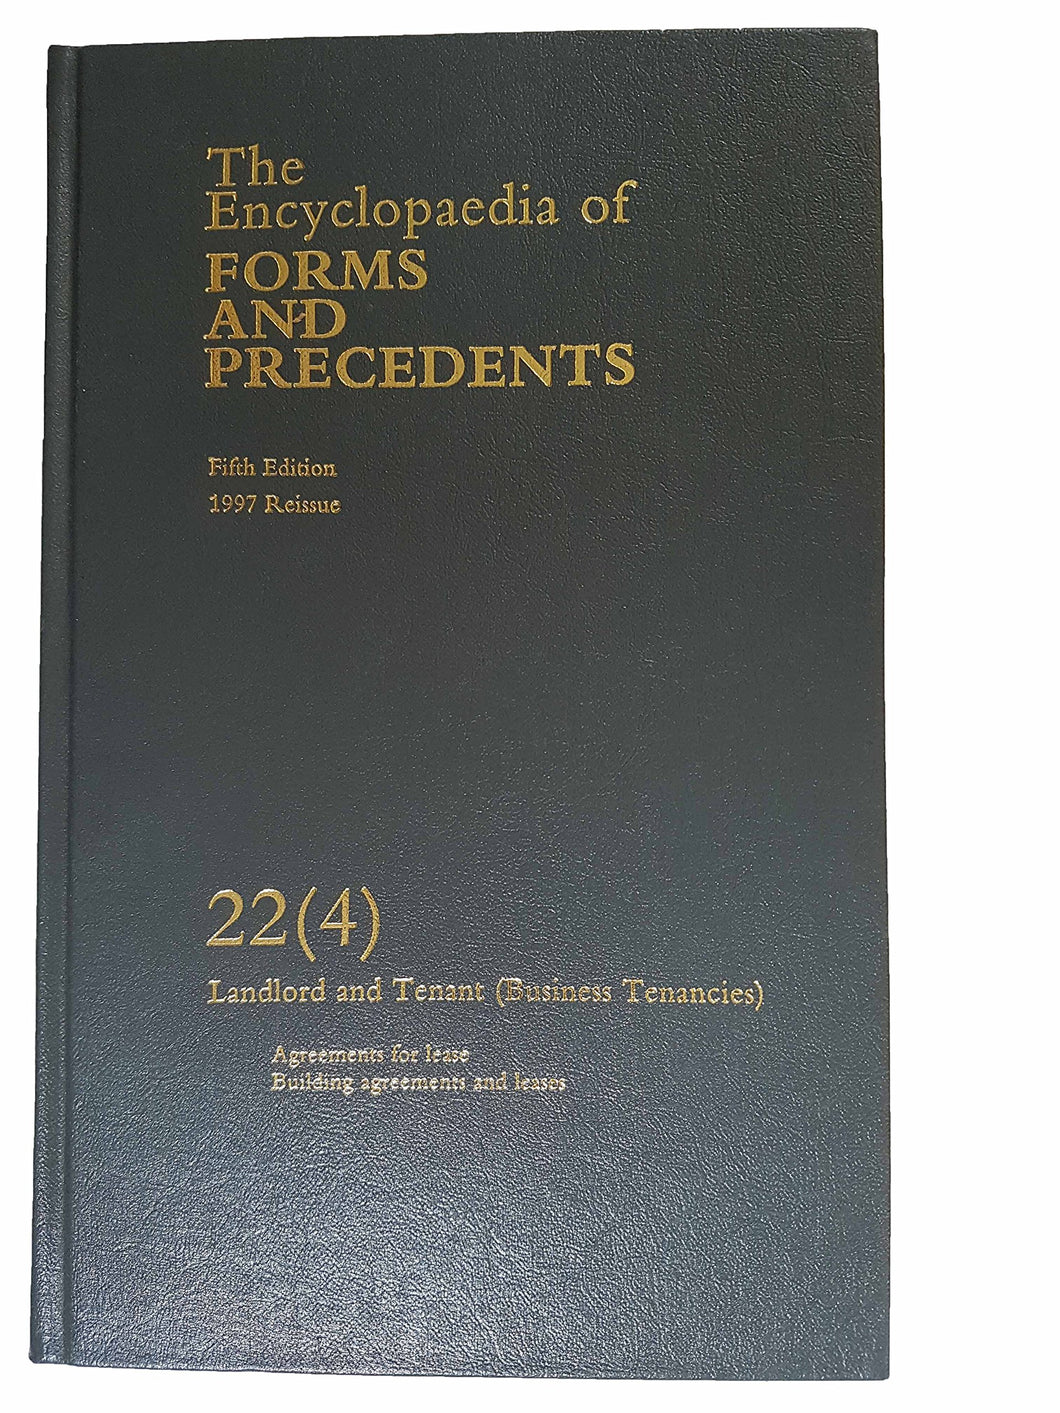 The Encyclopedia of Forms and Precedents, Volume 22 (4): Landlord and Tenant (Business Tenancies), Agreements for lease, Building Agreements and Leases